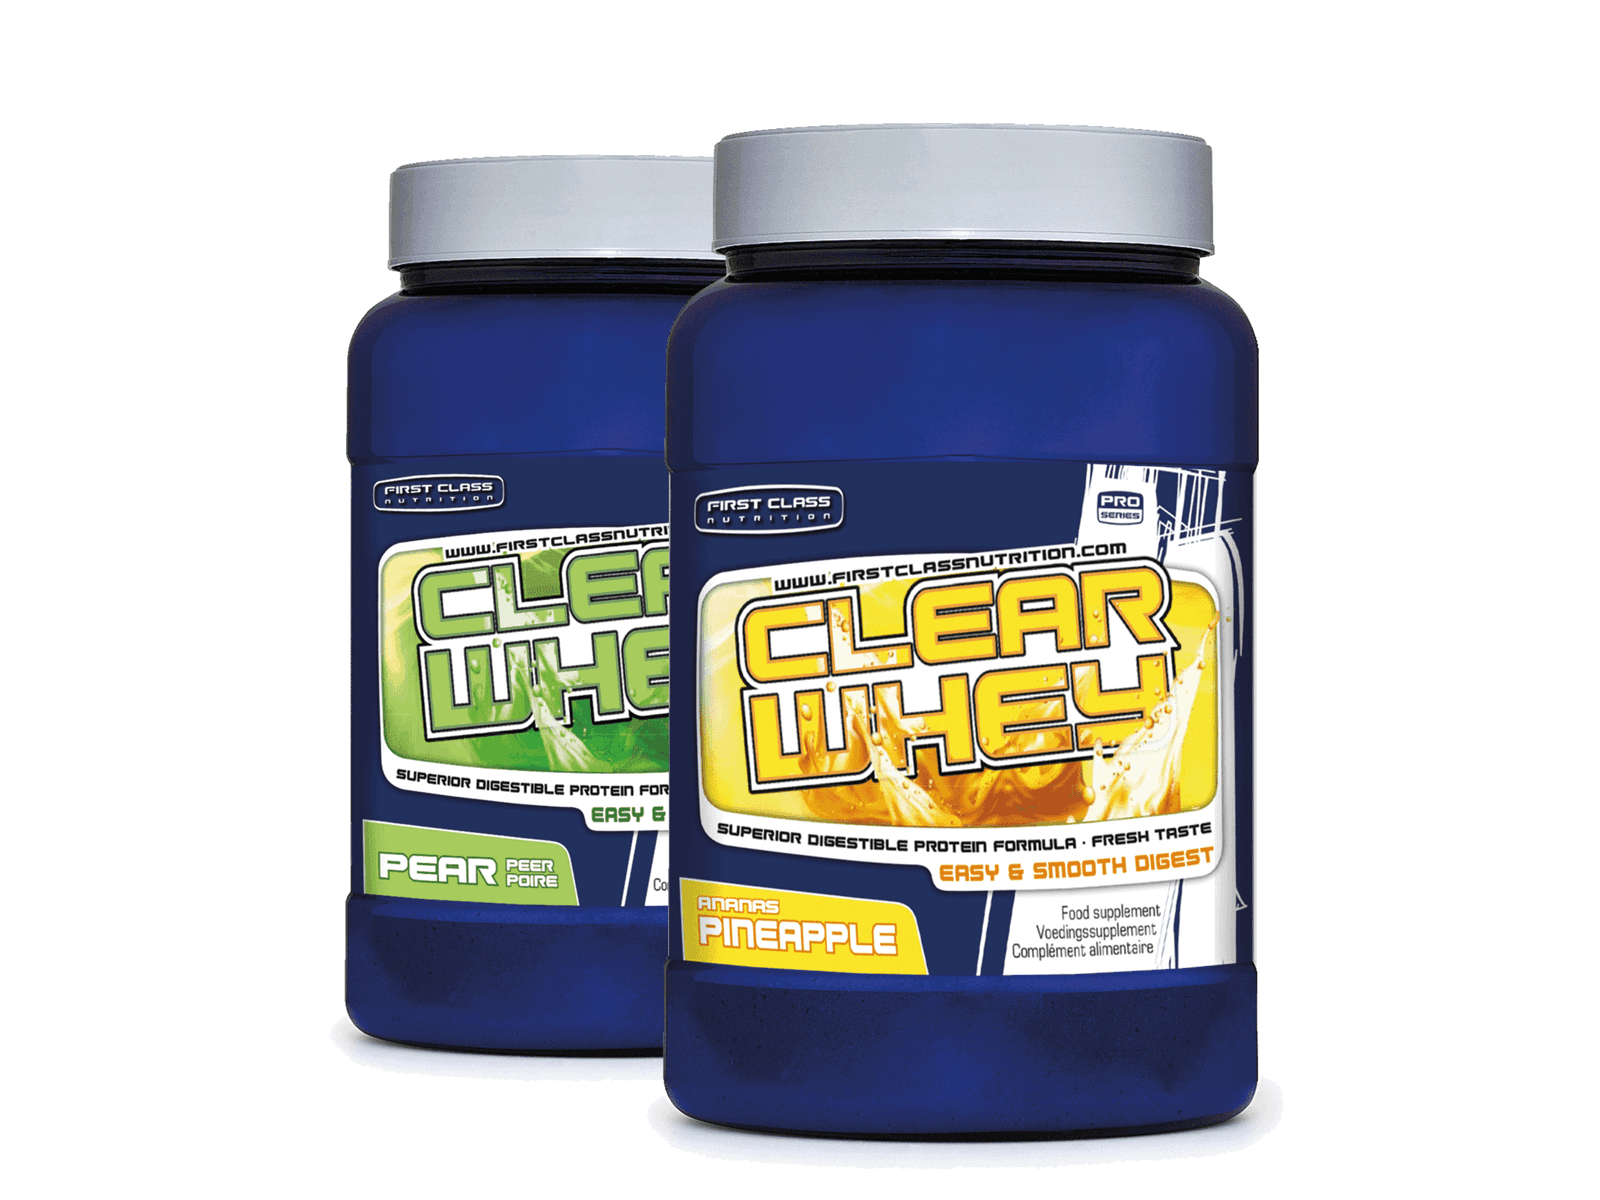 Clear Whey Mix Box (2 x 500 gram) - FIRST CLASS NUTRITION